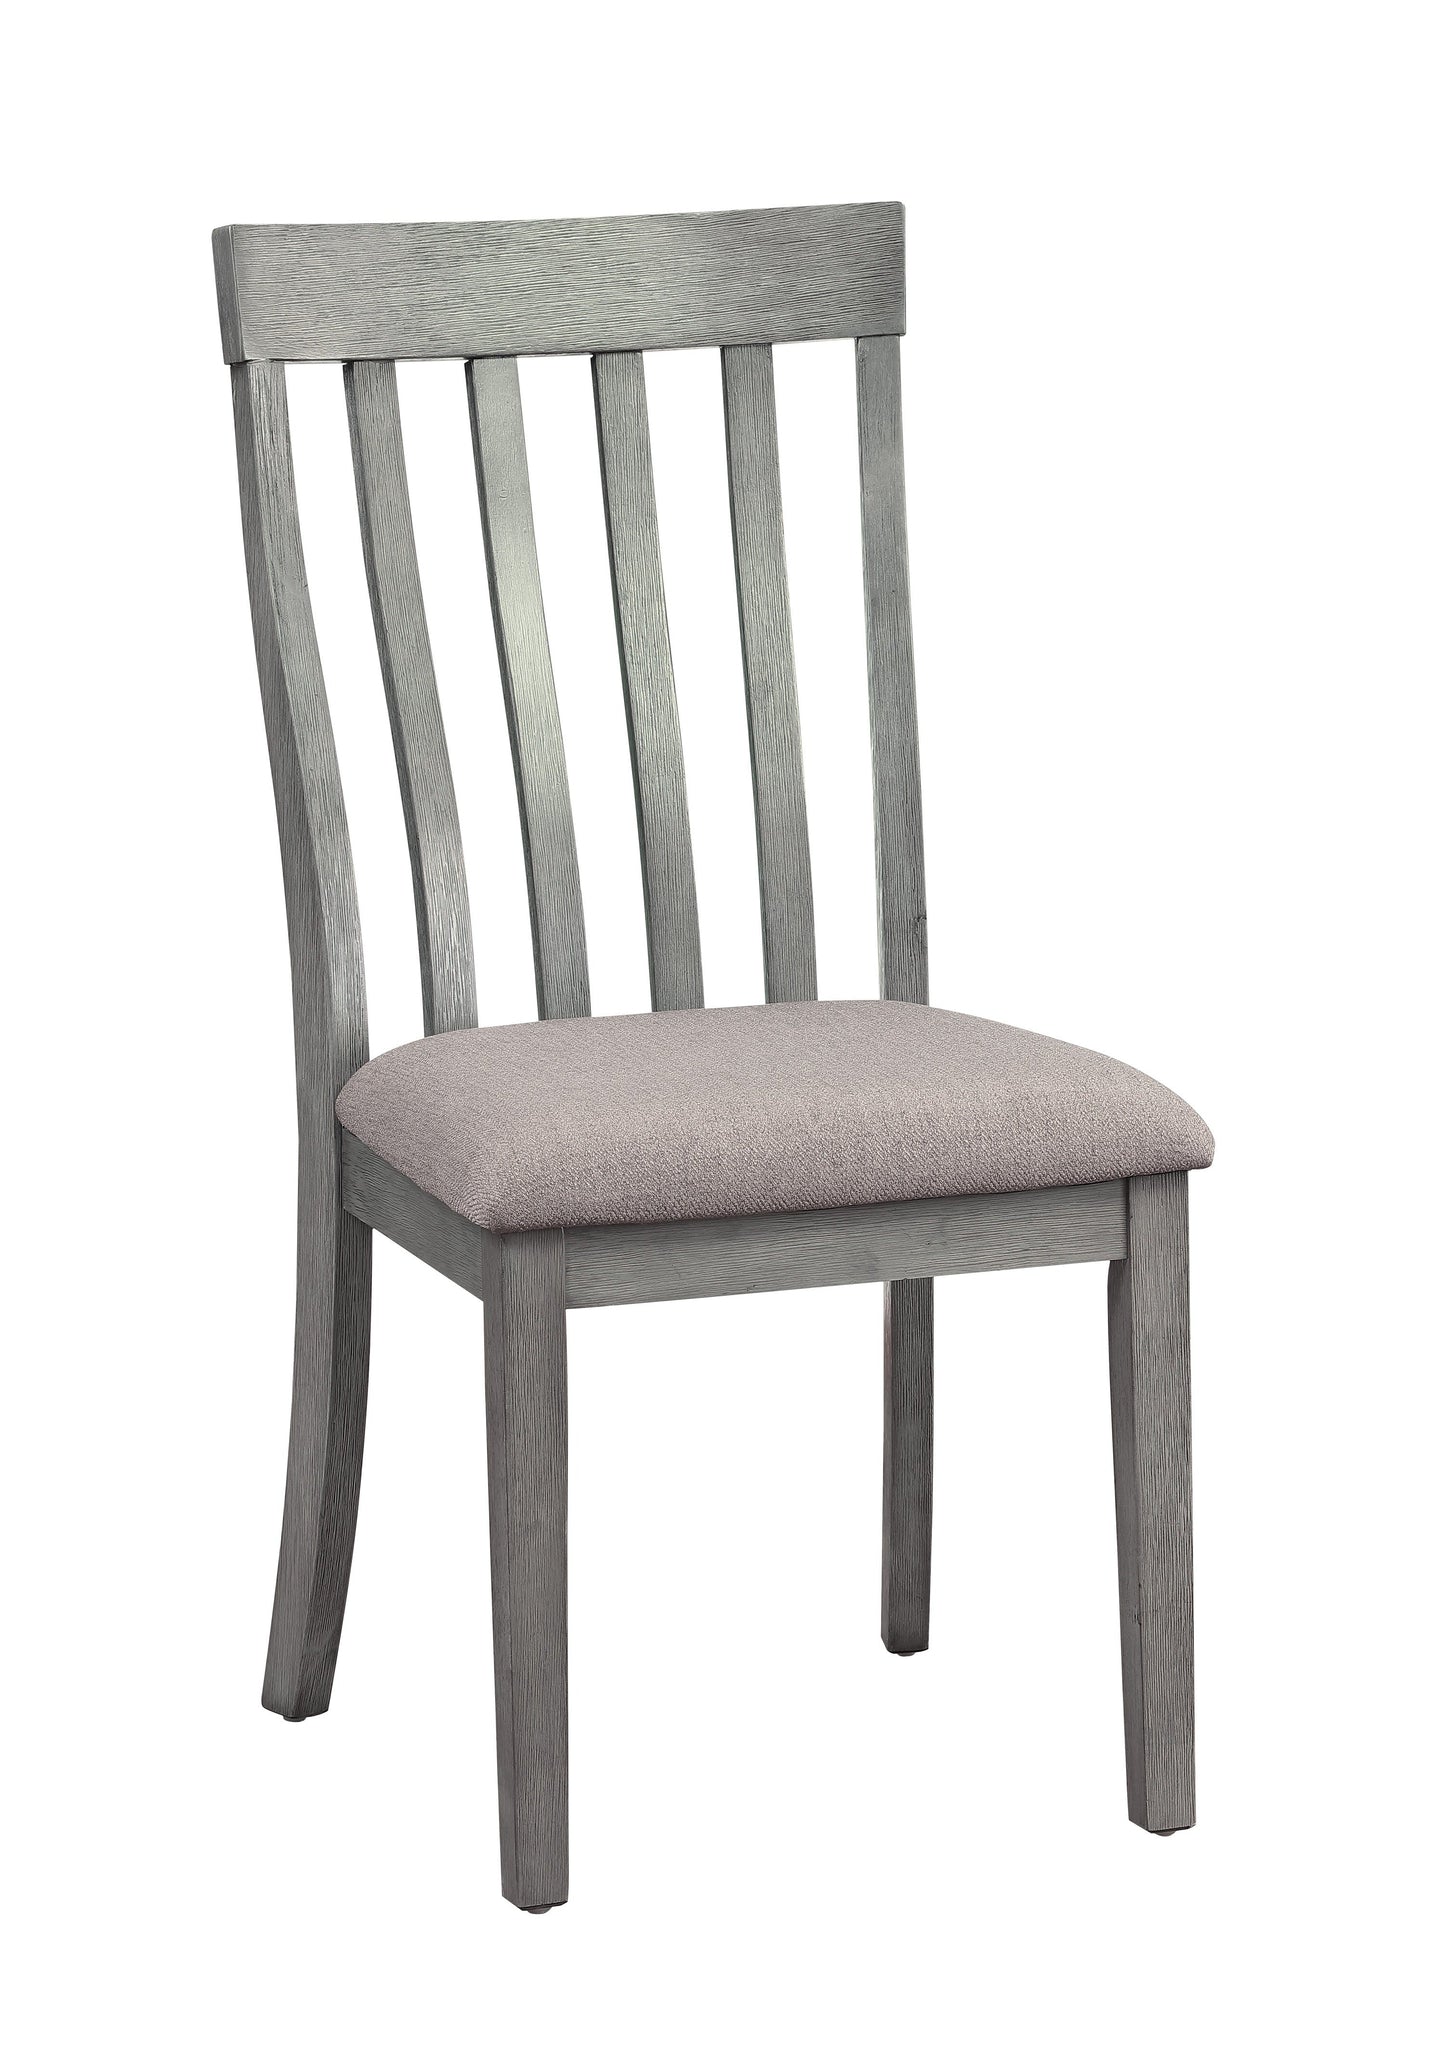 Polena Dining Chair - Grey/Charcoal